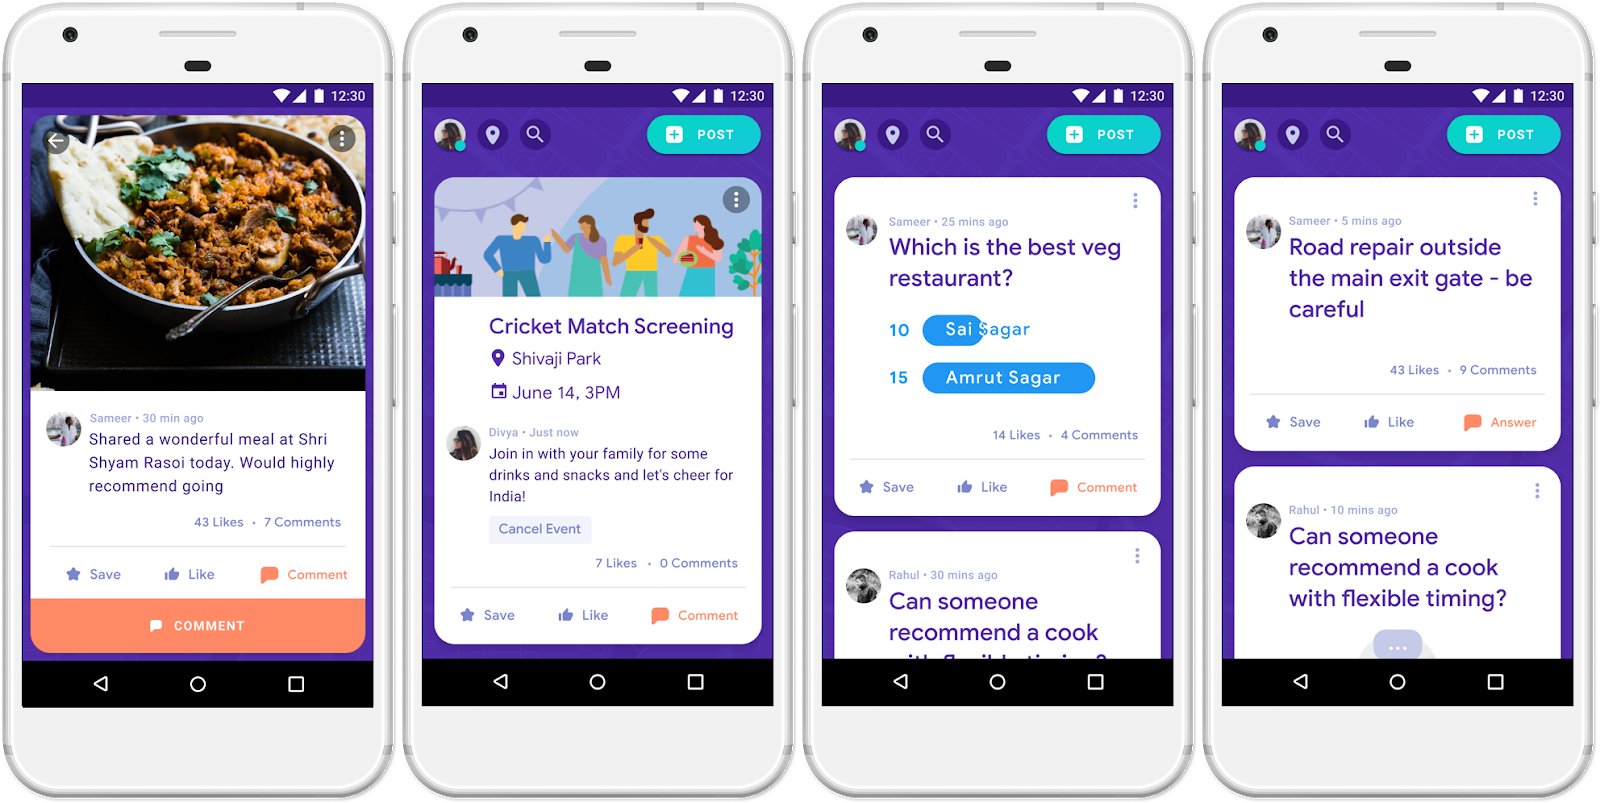 Google Neighbourly app update adds ability to post photos, create events, polls and more